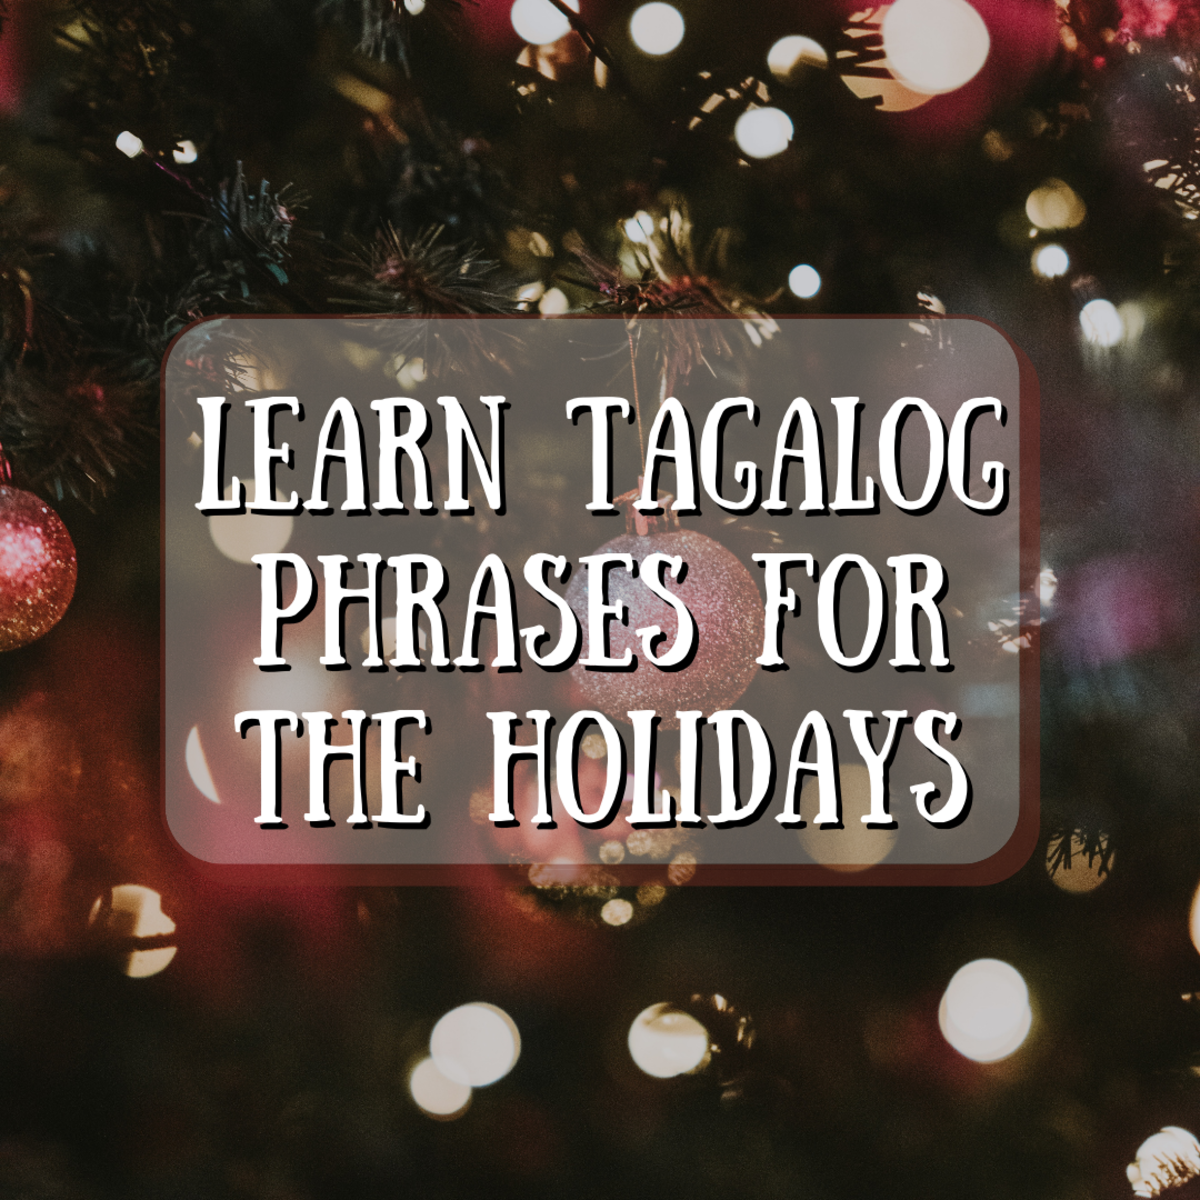 Learning these Tagalog Christmas words and phrases will surprise your family and friends and bring smiles to their faces. Bring some unexpected joy into the home this holiday season!